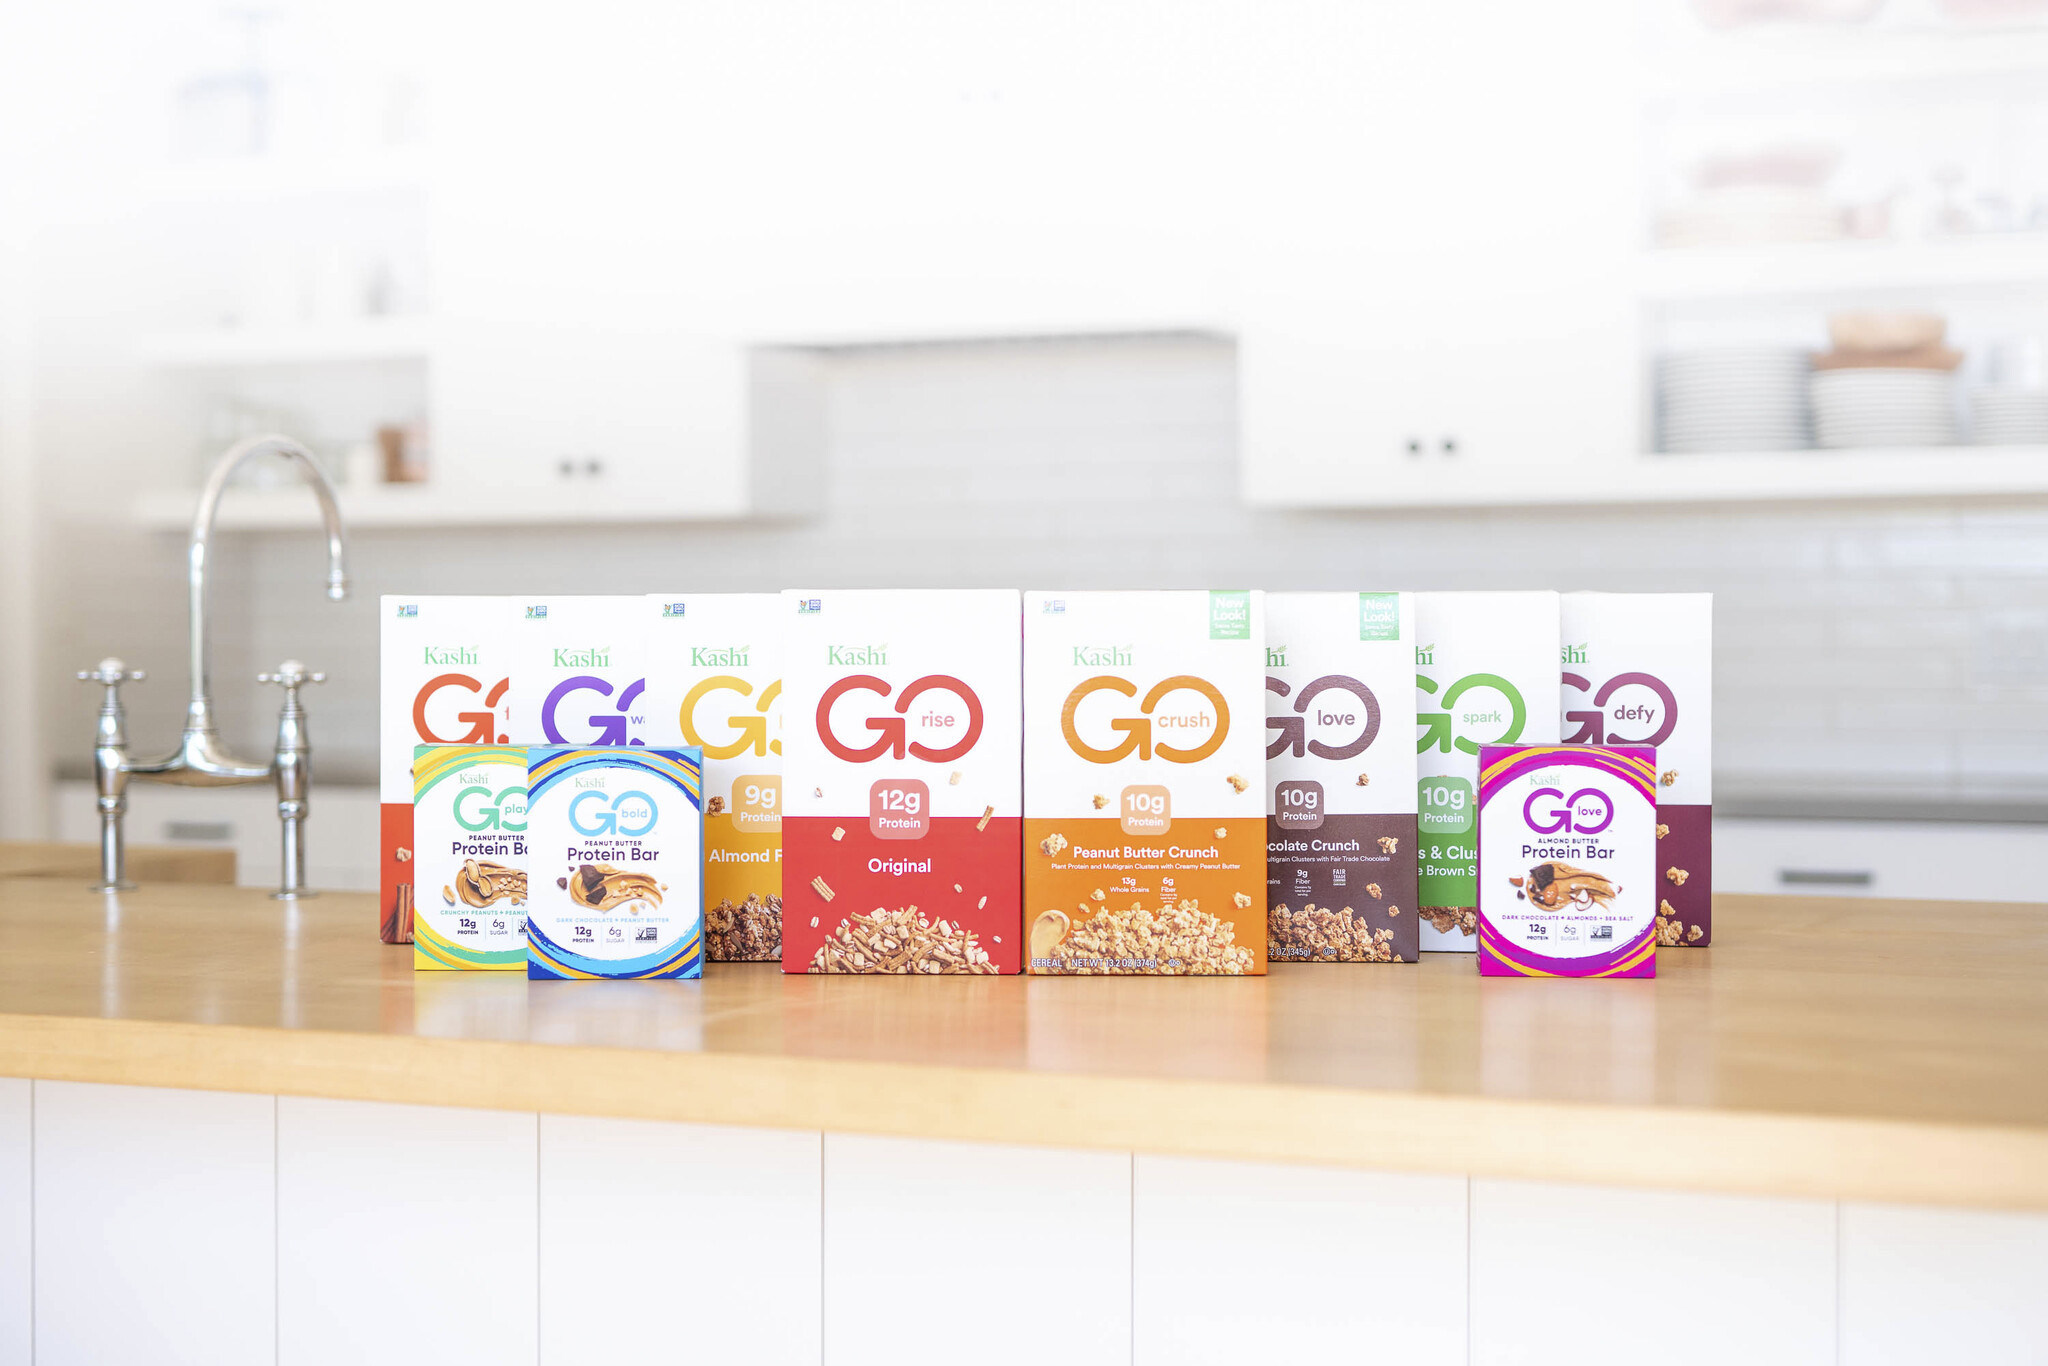 Kashi is giving you the chance to win Kashi swag during the Kashi GO Sweepstakes. All you need to do for a chance to win is tell us what your "GO" looks and tag #kashigosweepstakes to enter